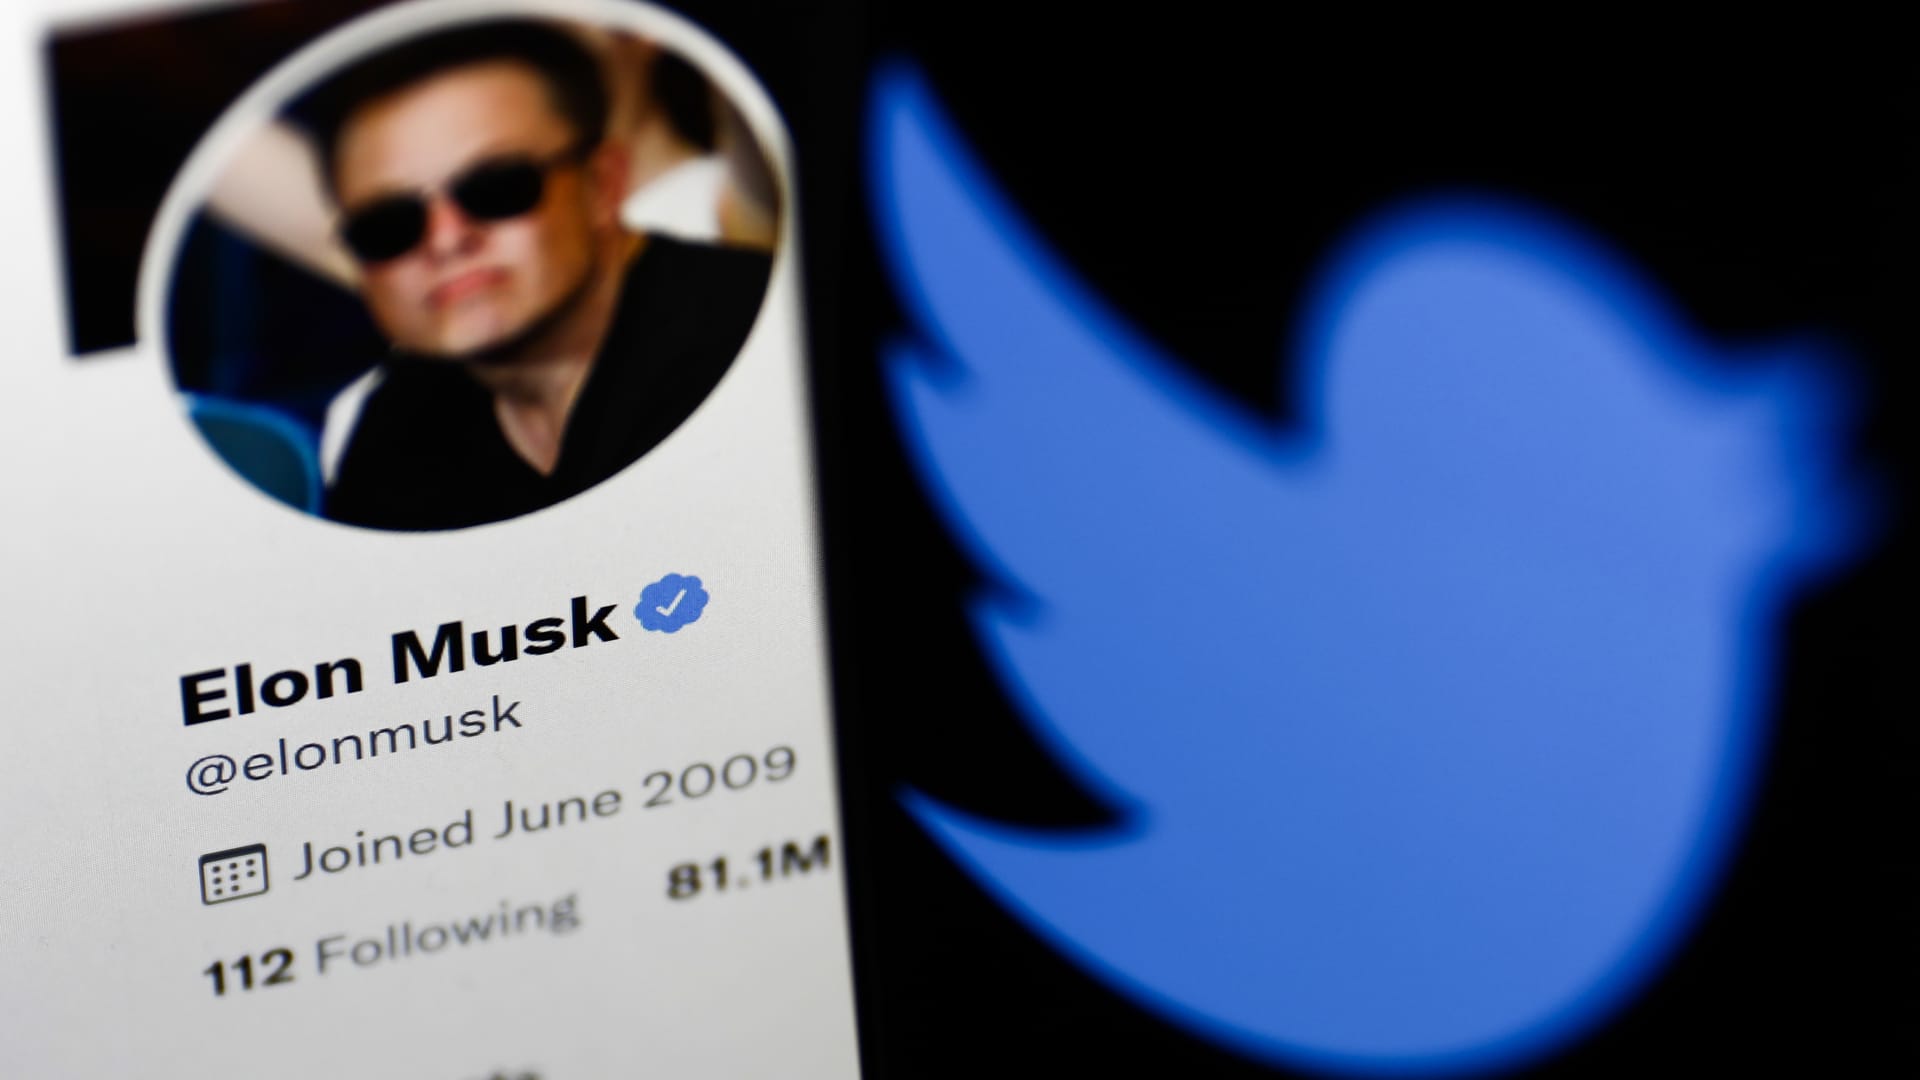 In DC, Musk’s Twitter deal is either a free speech victory or fuel to tax the rich